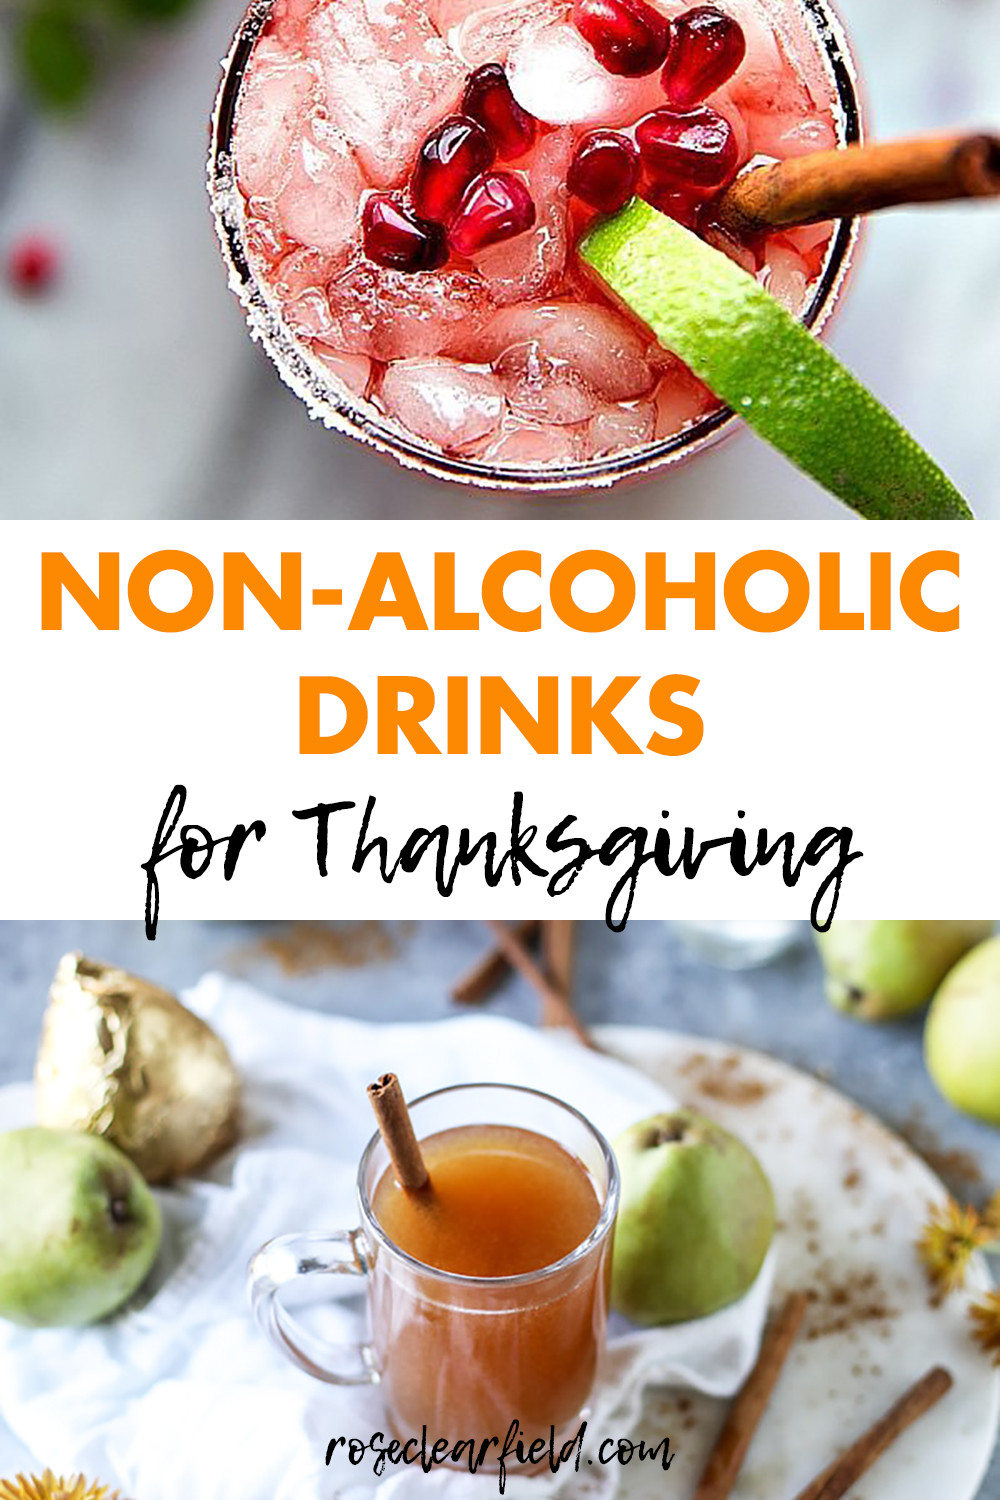 Thanksgiving Drinks Non Alcoholic
 Non Alcoholic Drinks for Thanksgiving • Rose Clearfield